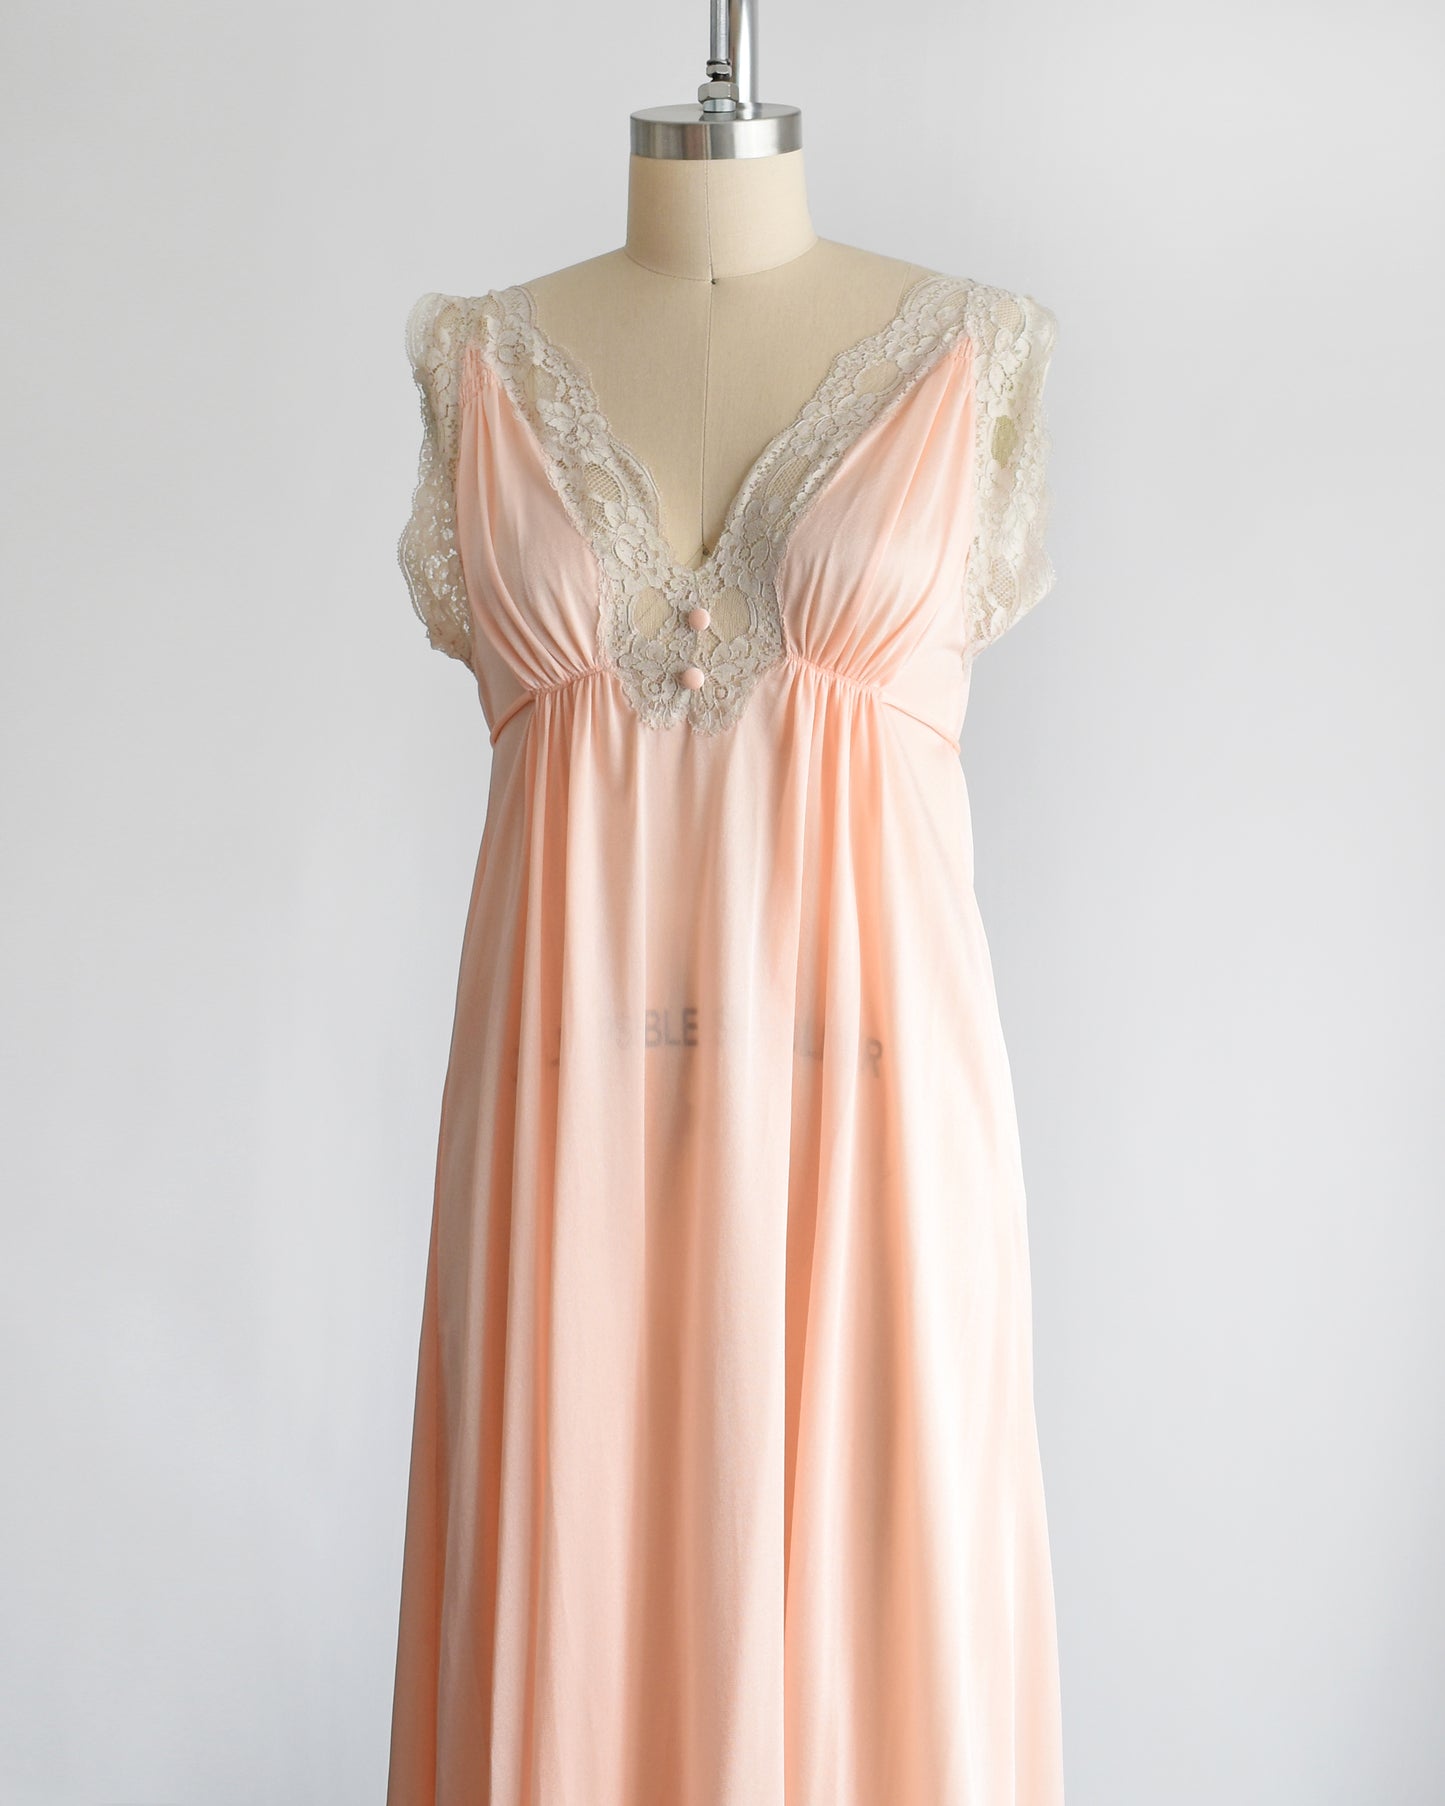 Side front view of a vintage 1970s peach nightgown with lace trim